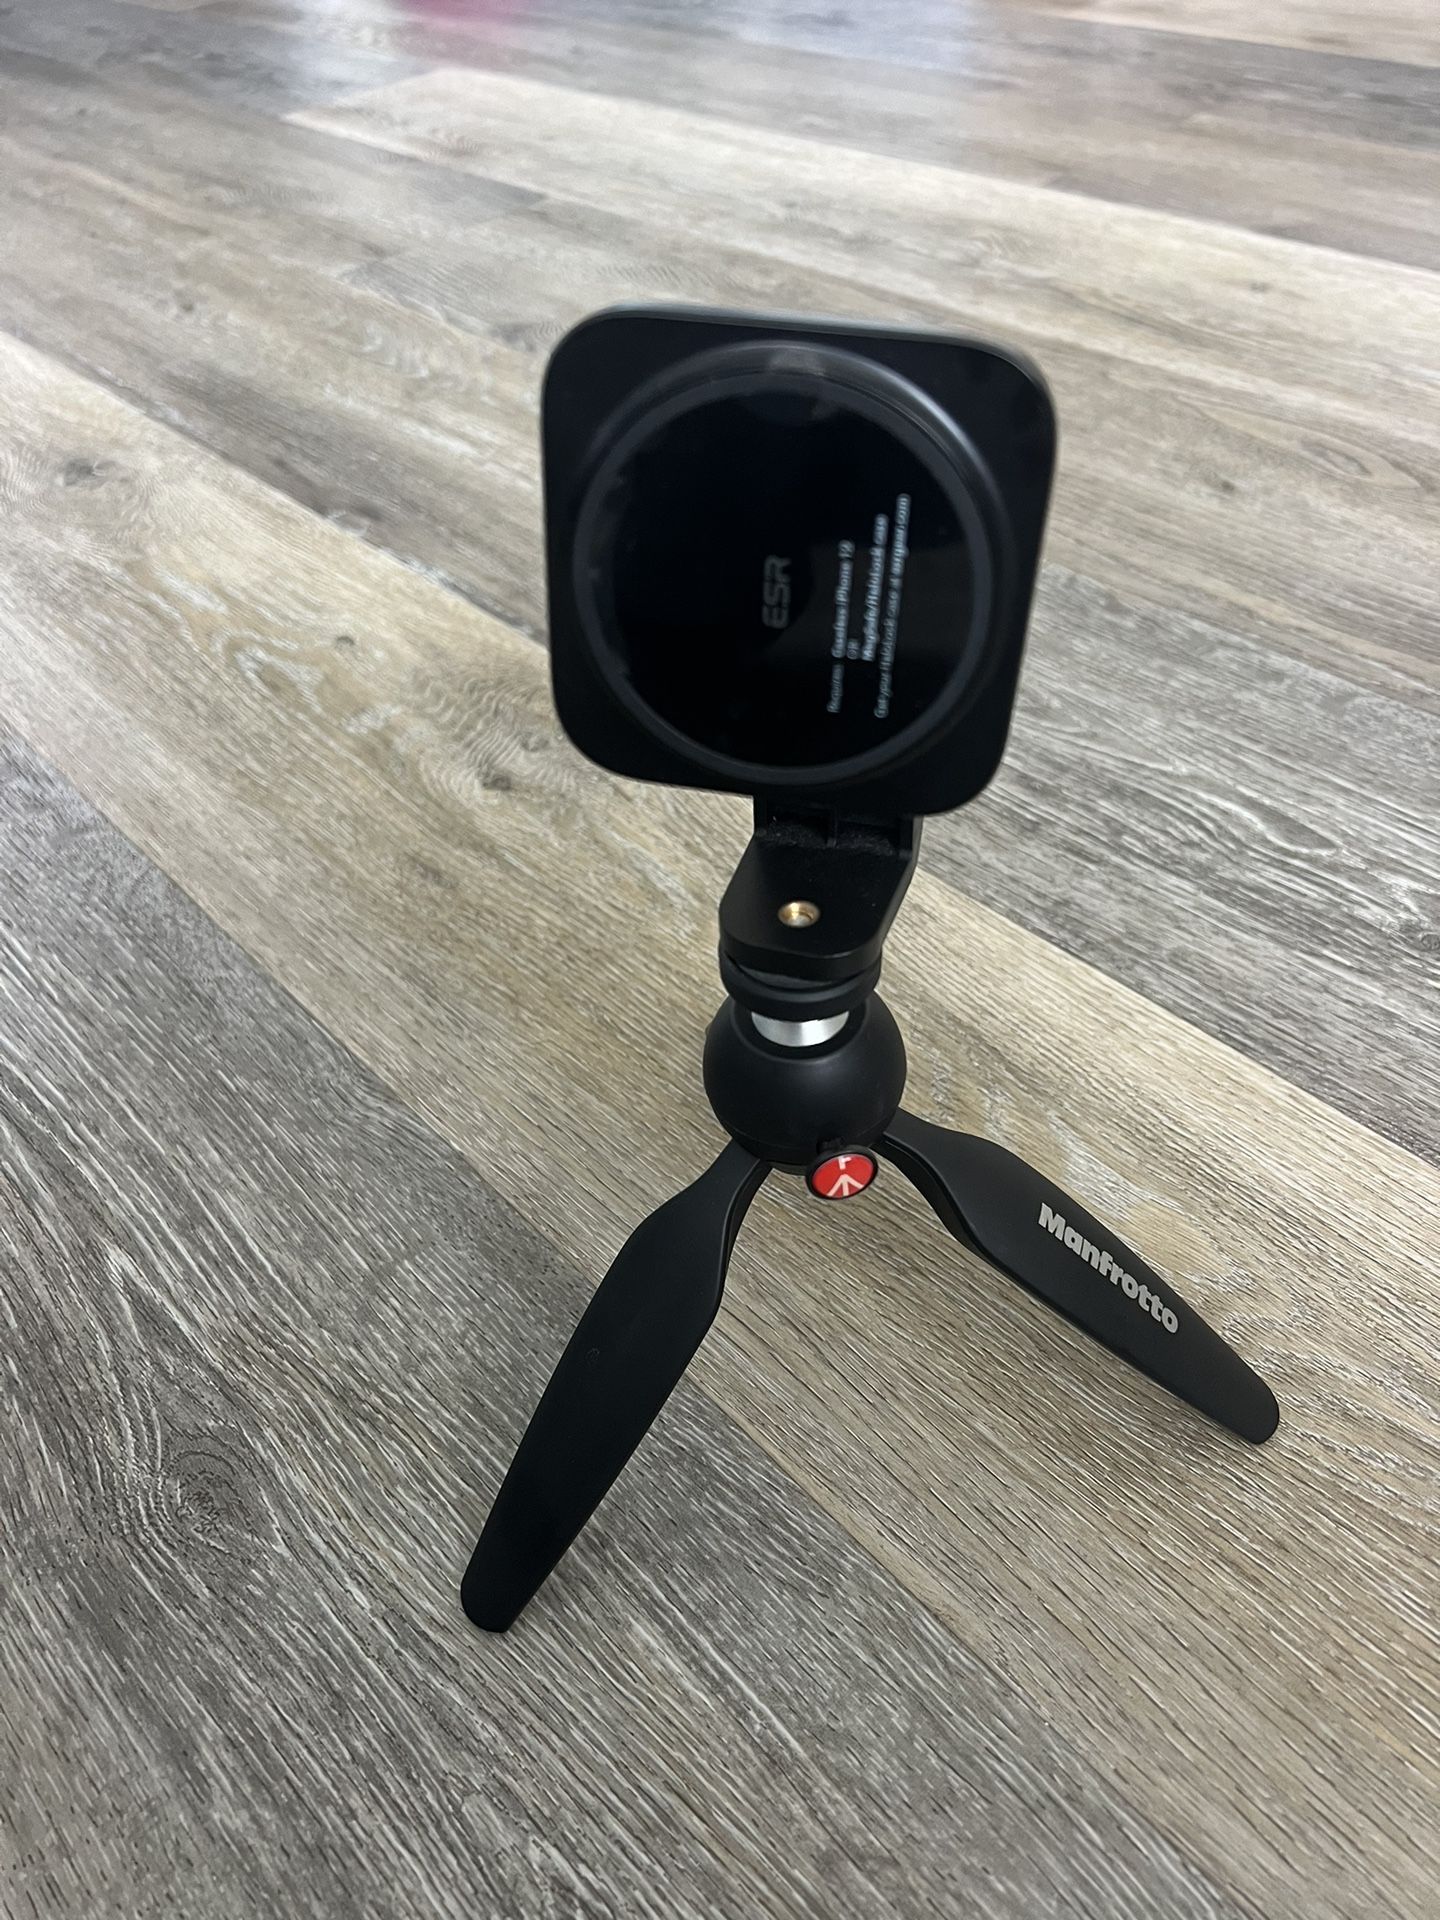 Magnetic ESR mount and Manfrotto tripod